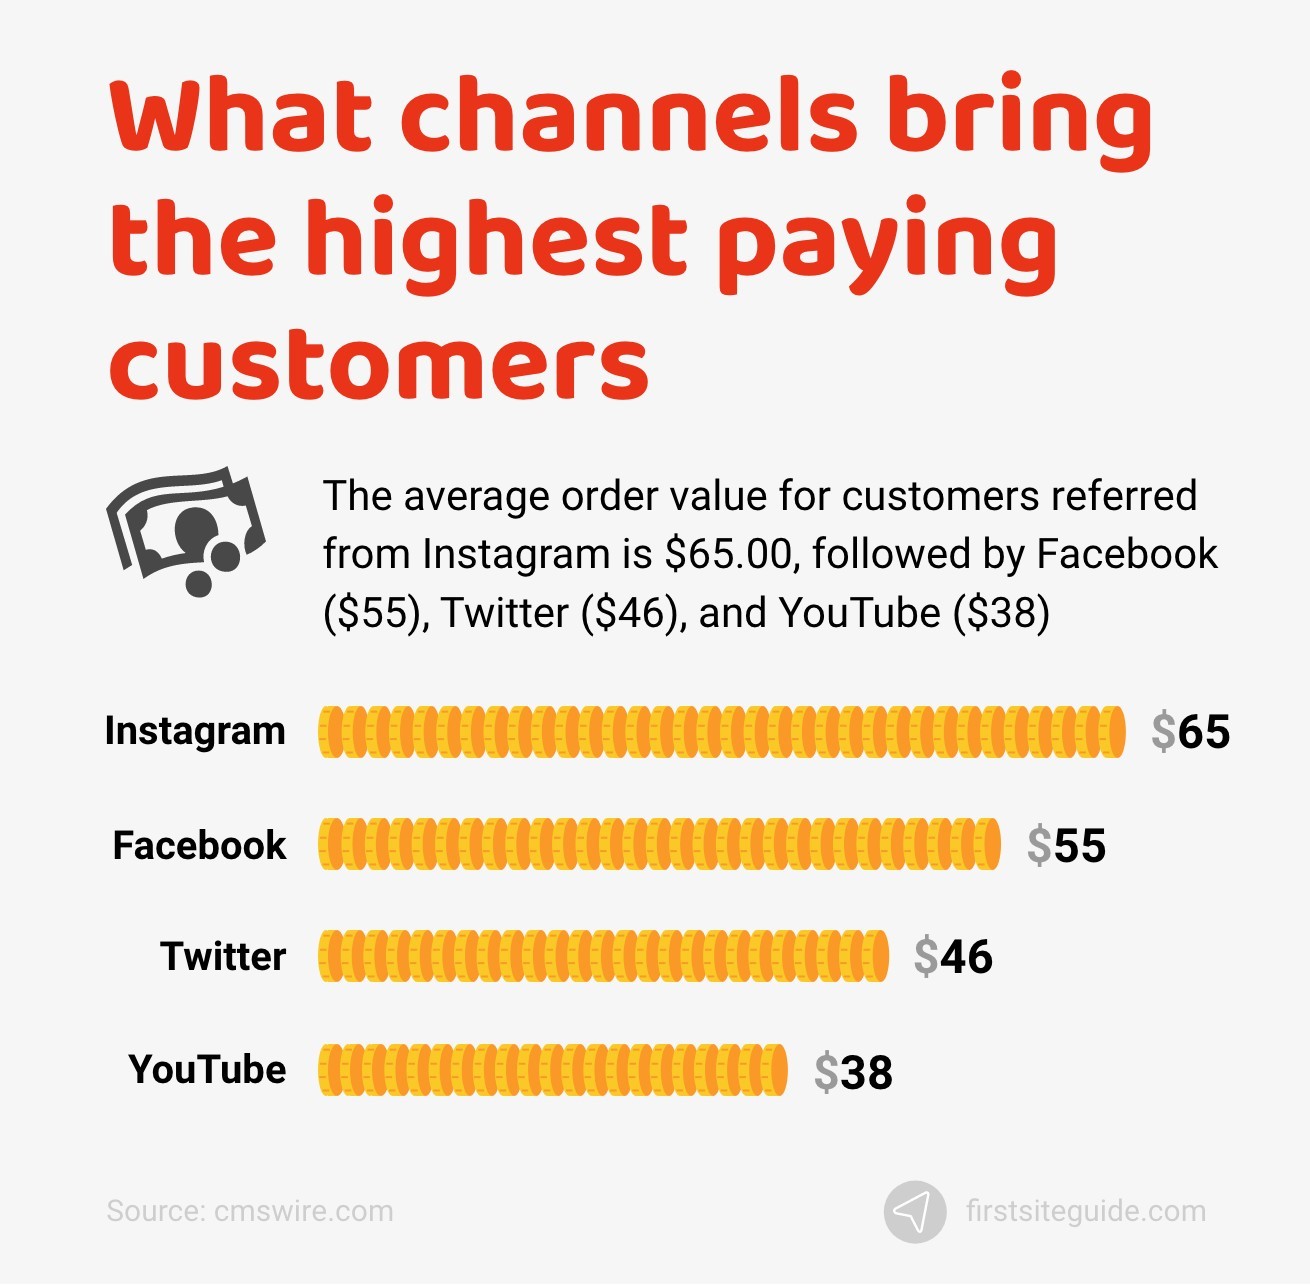 A dollar-wise comparison of the average order value of customers on various popular social media channels.